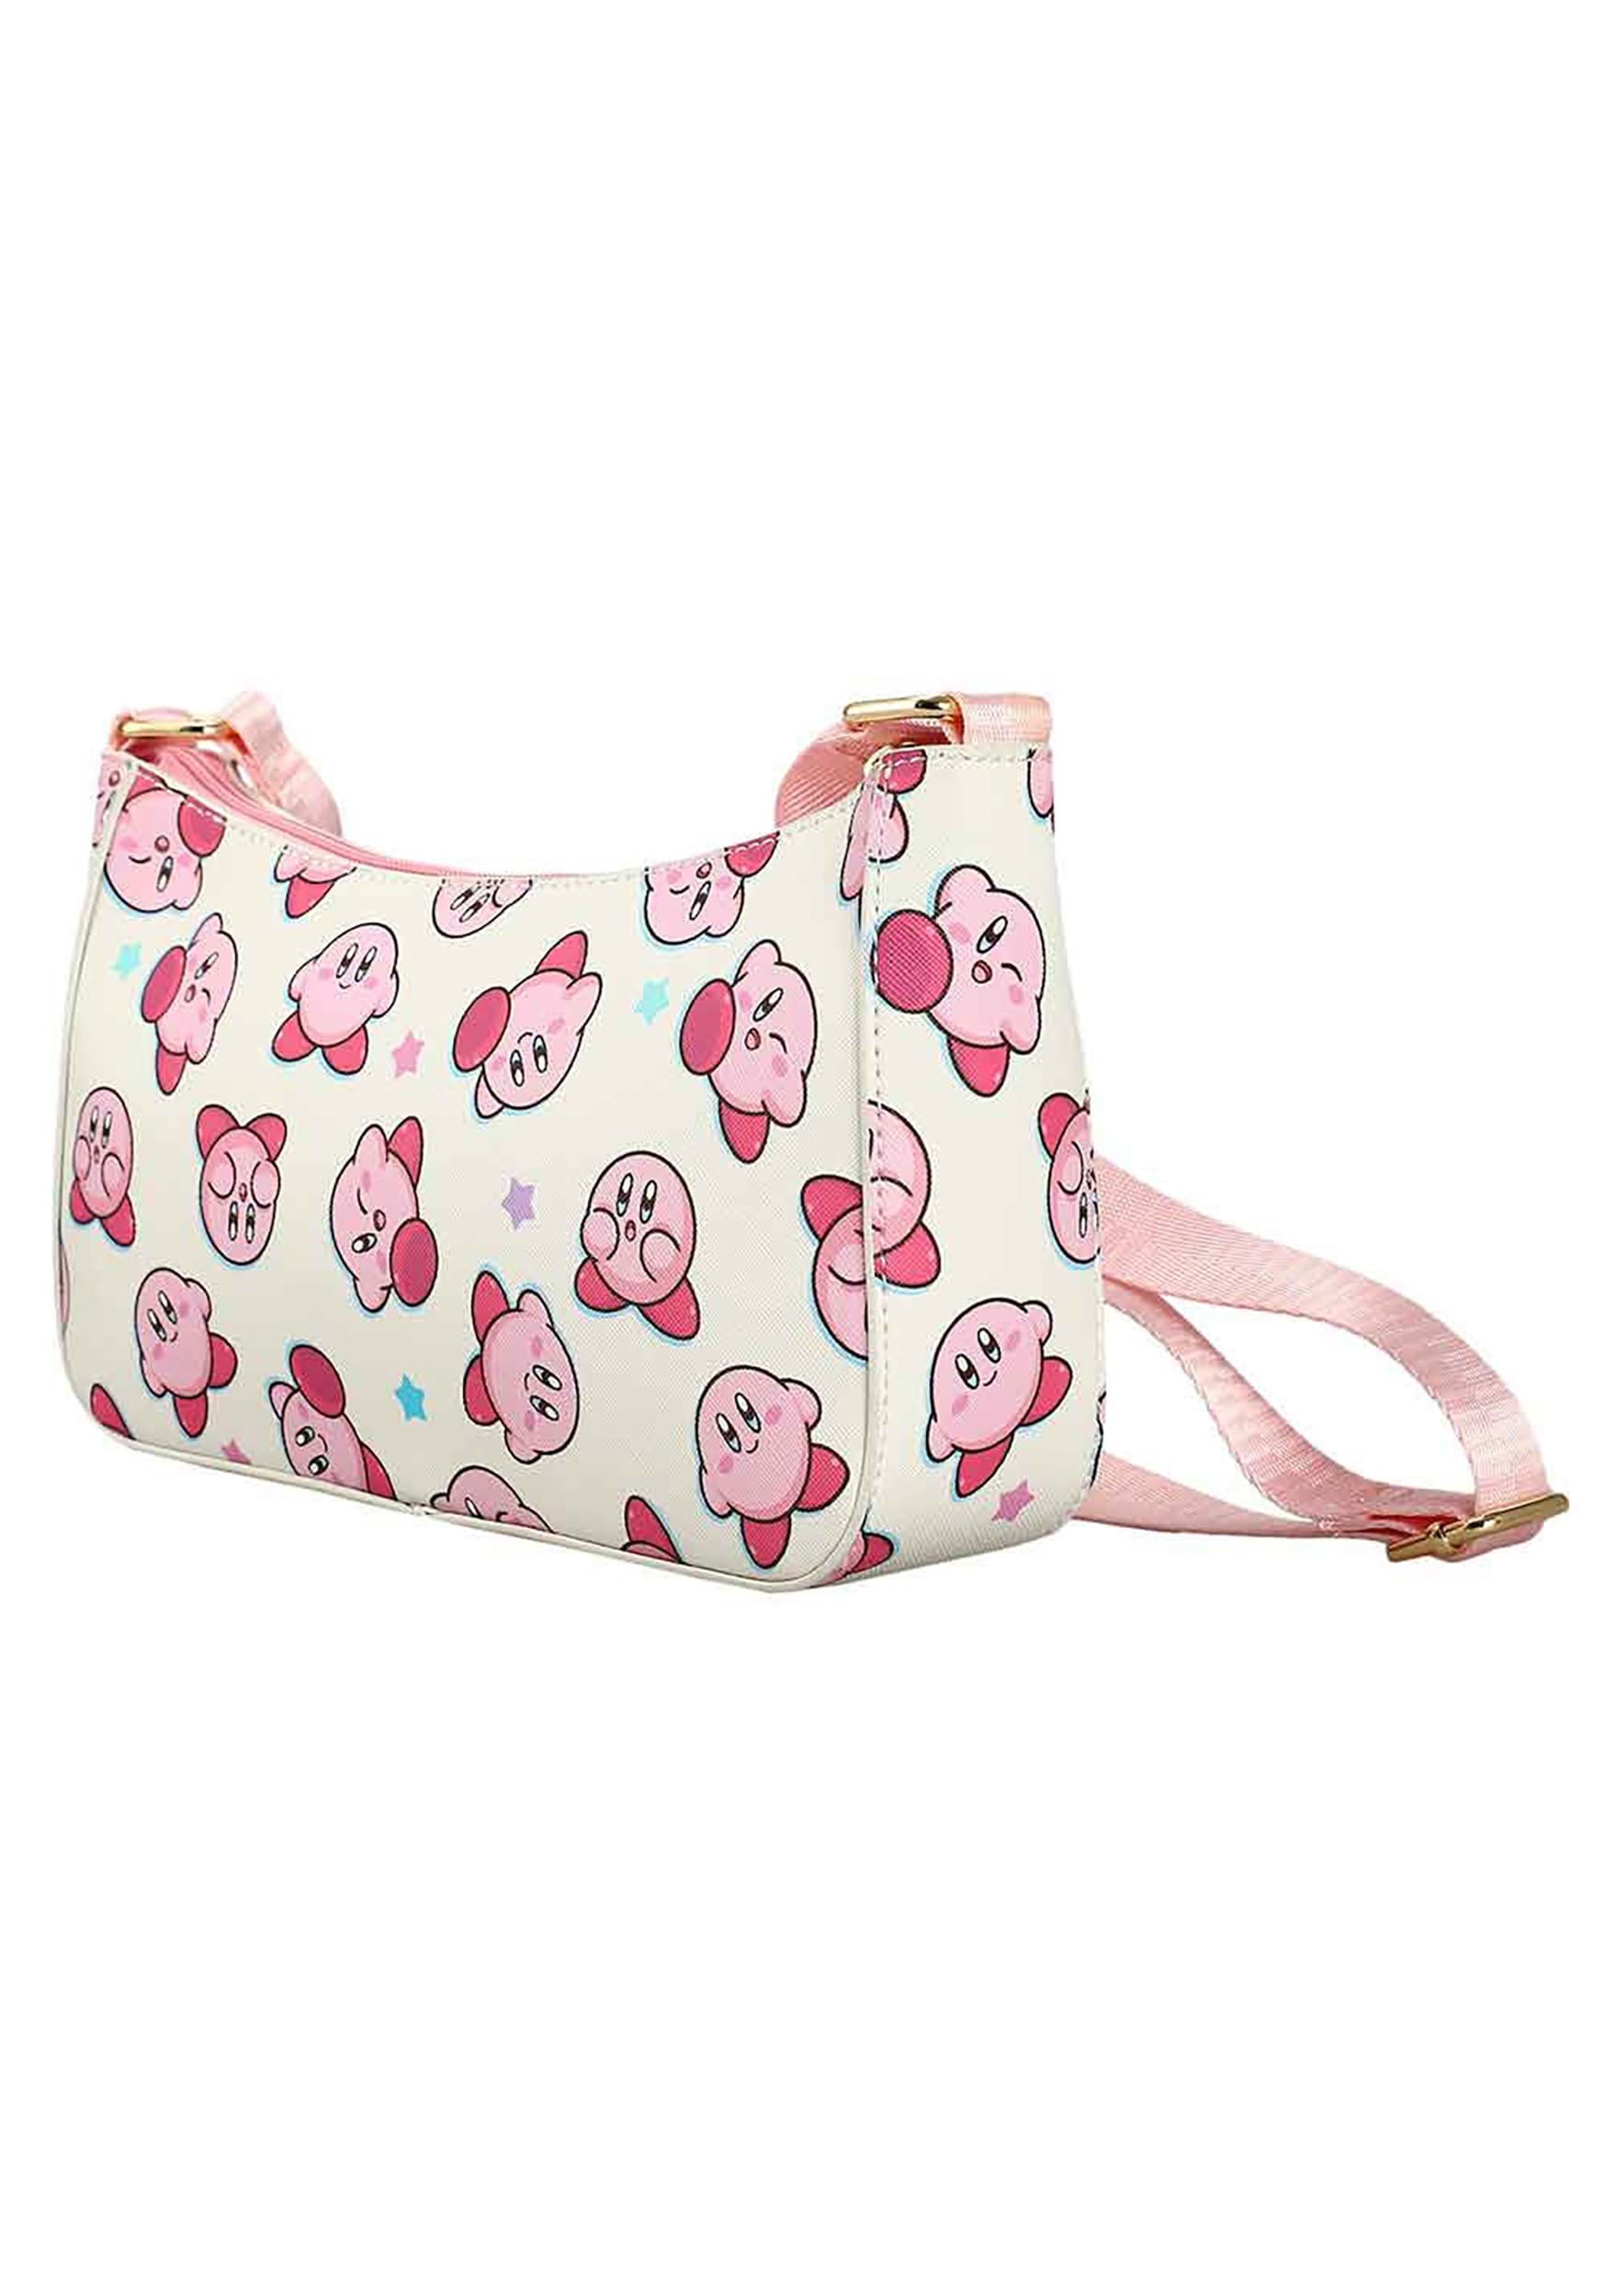 https://images.fun.com/products/86237/2-1-234958/kirby-aop-handbag-and-coin-pouch-alt-2.jpg